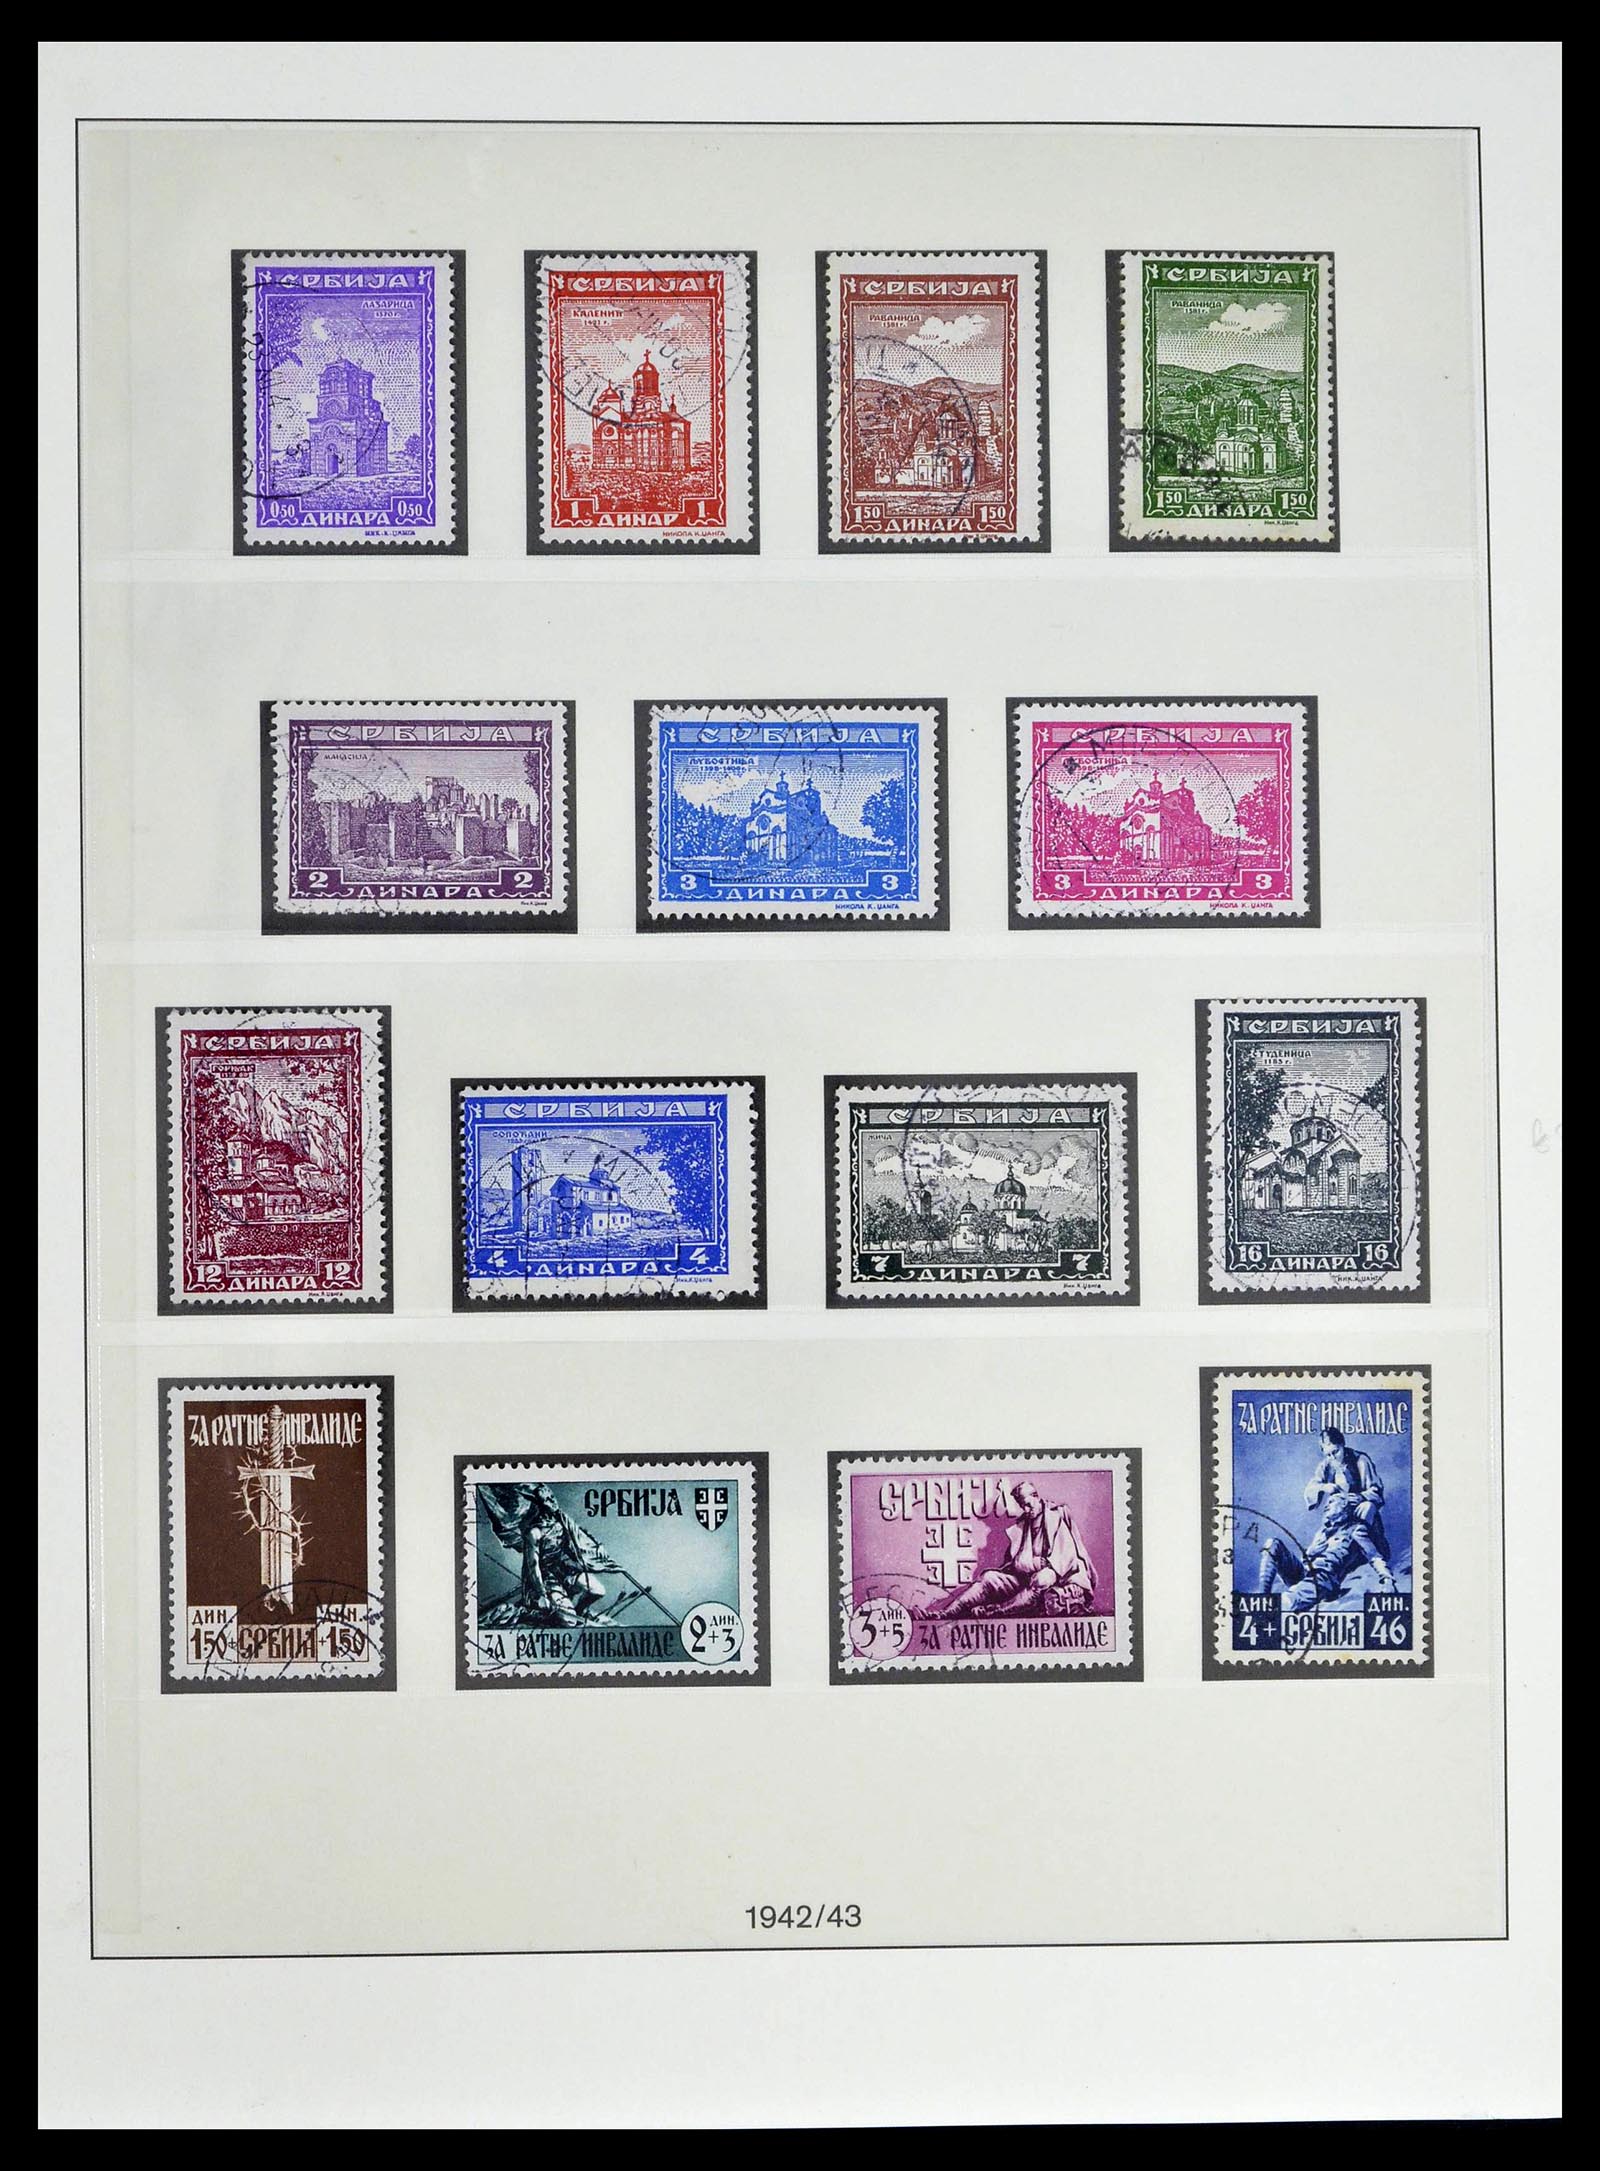 39396 0025 - Stamp collection 39396 German occupation WW II 1939-1945.